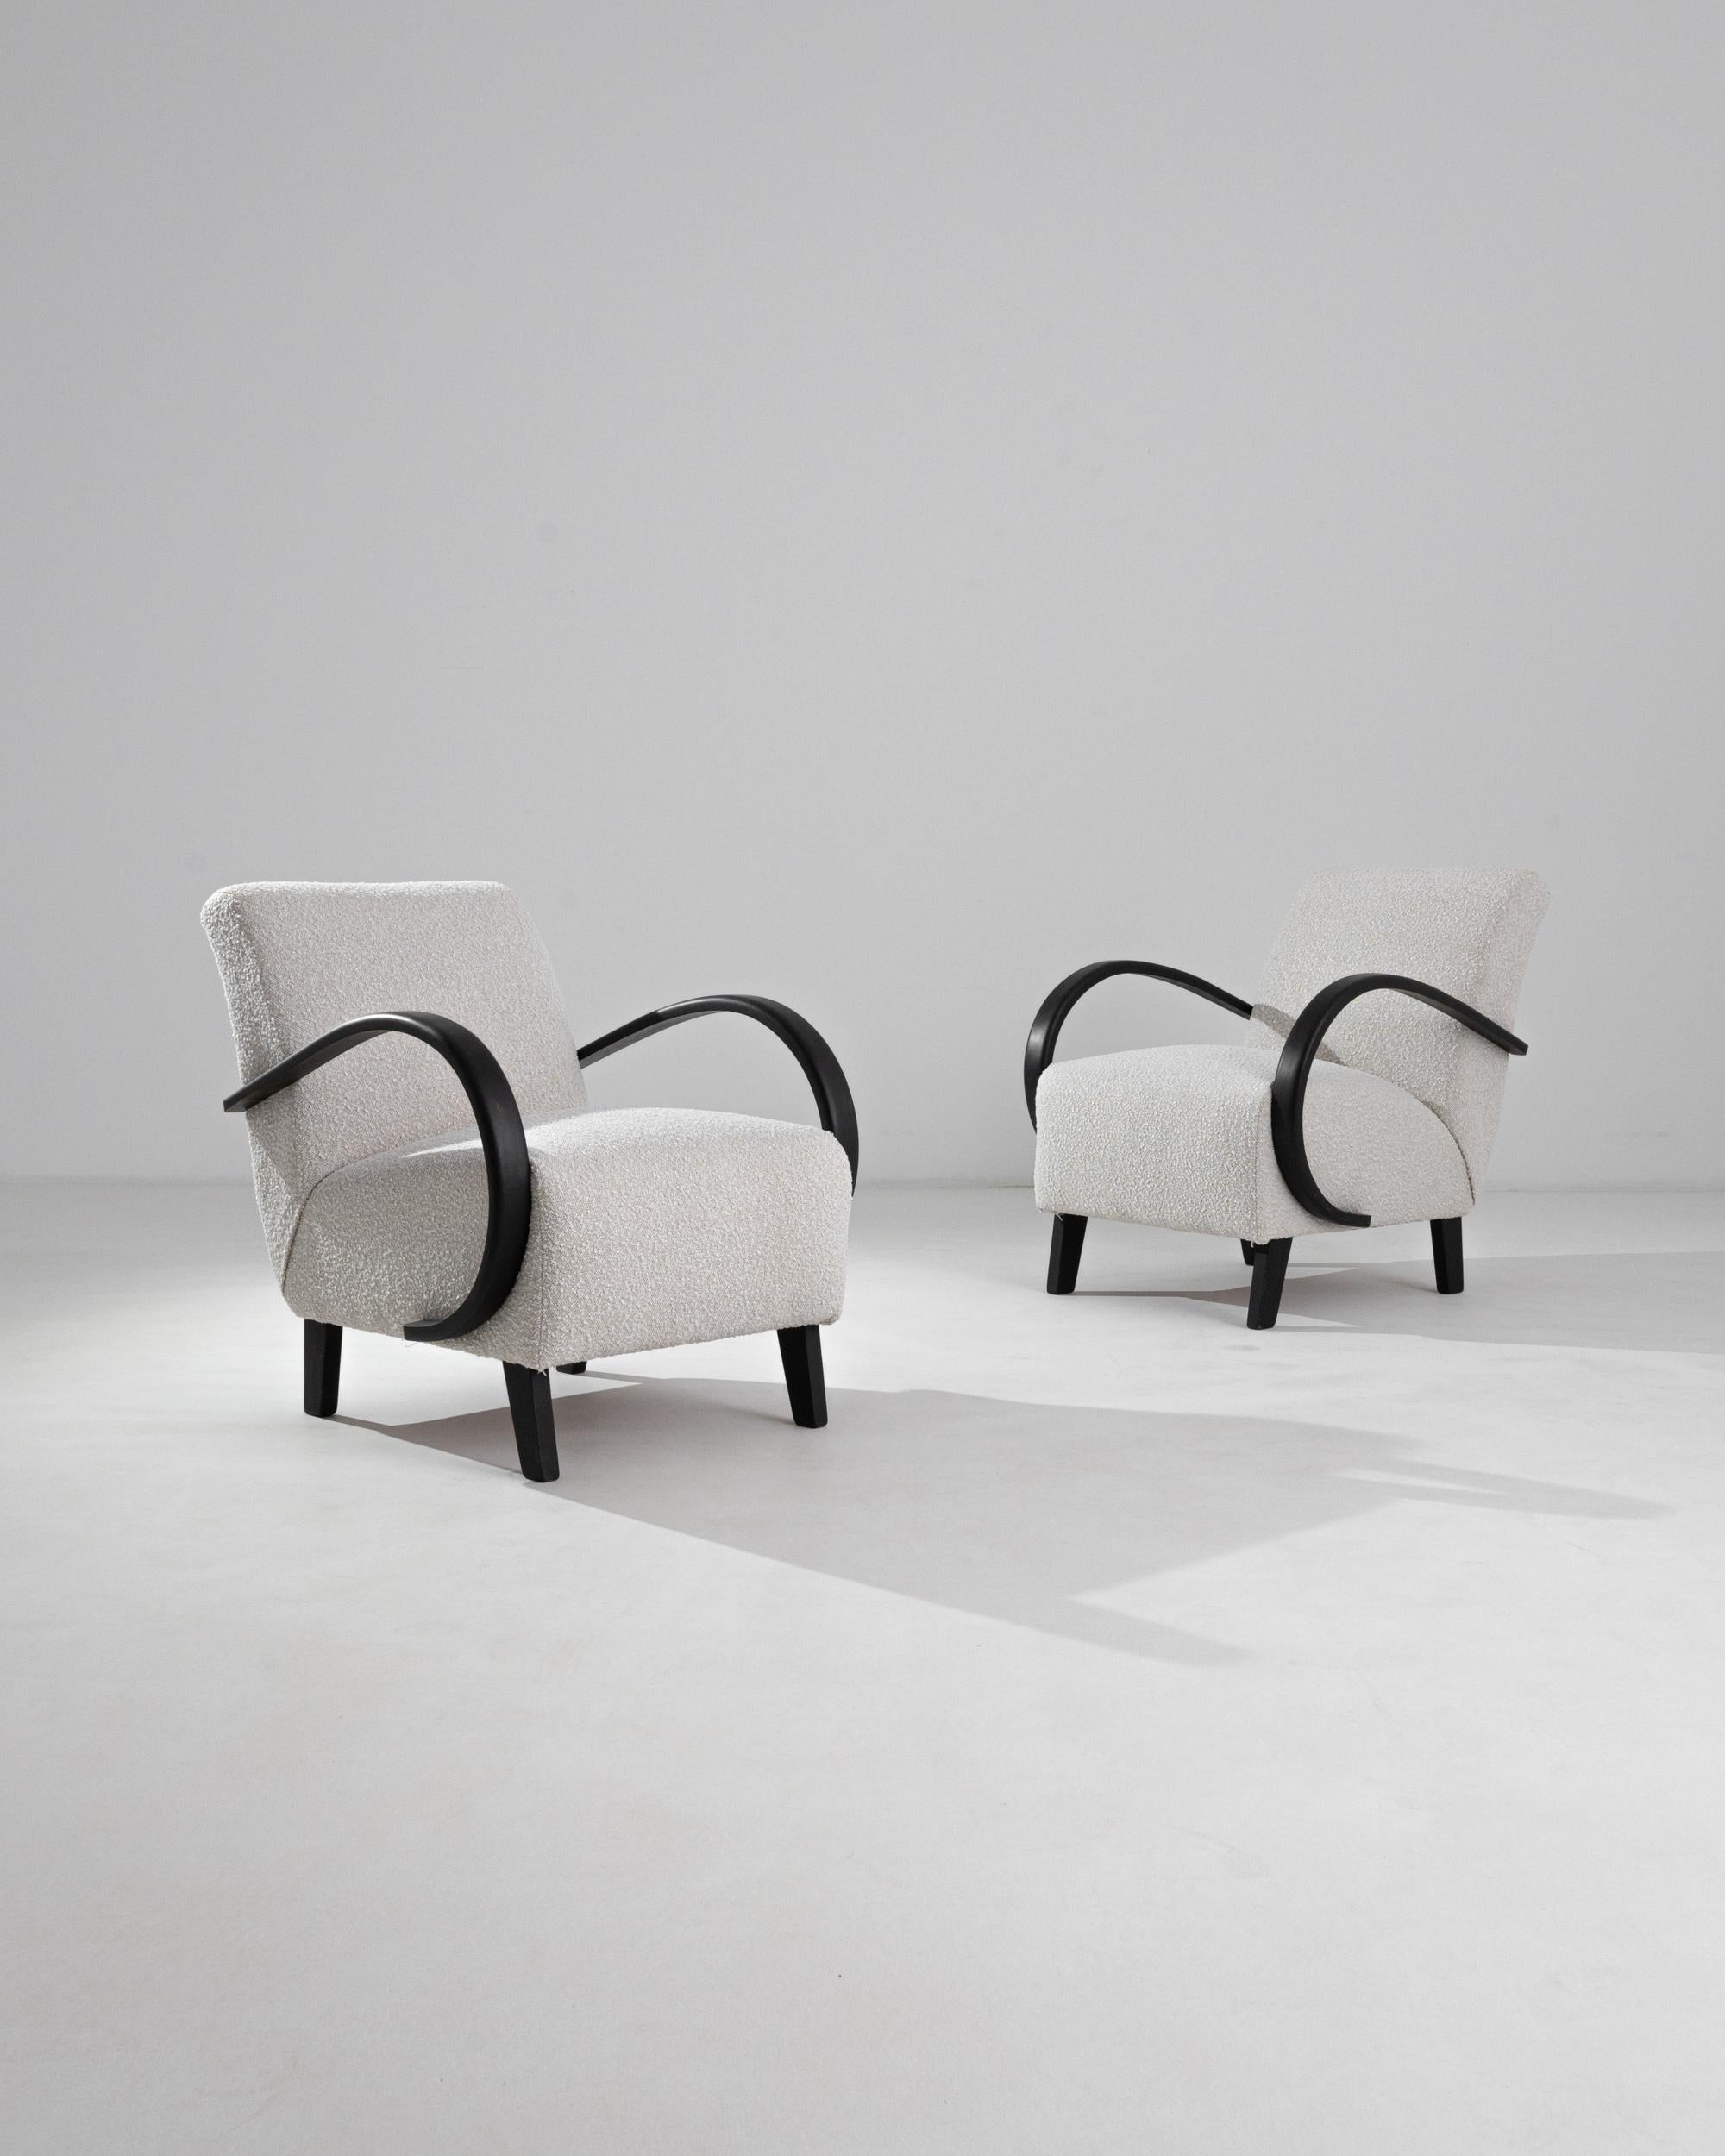 Classic black bentwood combines with reupholstered white bouclé in this iconic design by J. Halabala. The chair’s curving legs and bentwood armrests dream up the dynamism of the piece. Contemporary fabric was chosen to enhance the sumptuous shape of